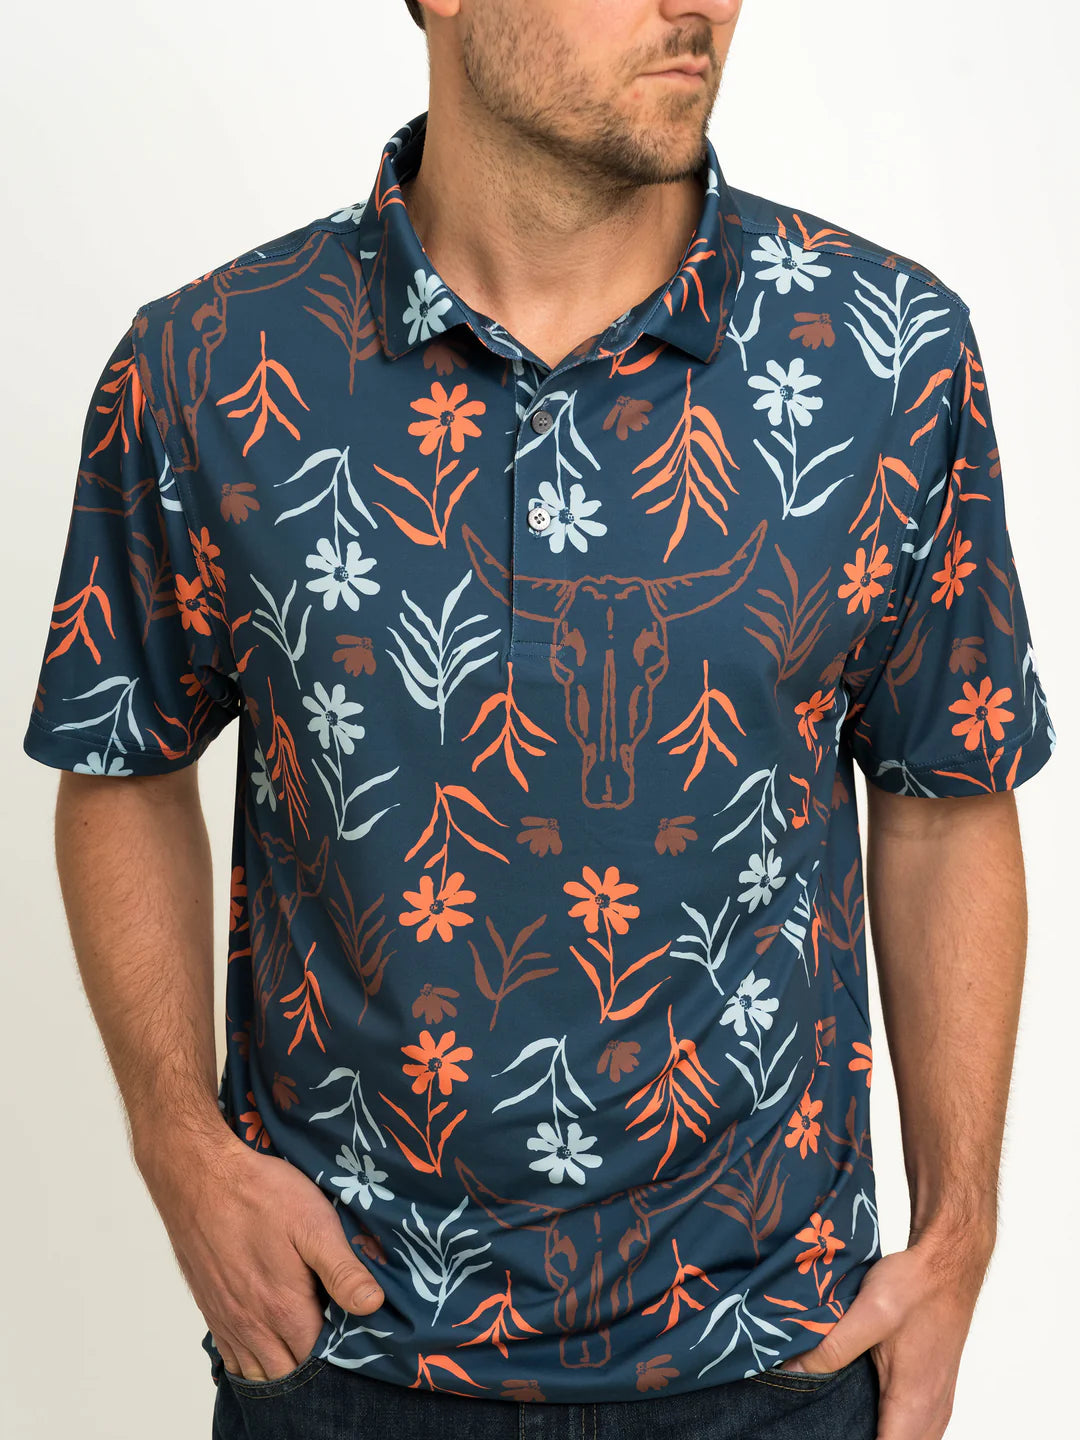 male model wearing a dark blue polo with daisies and cow skulls printed on it